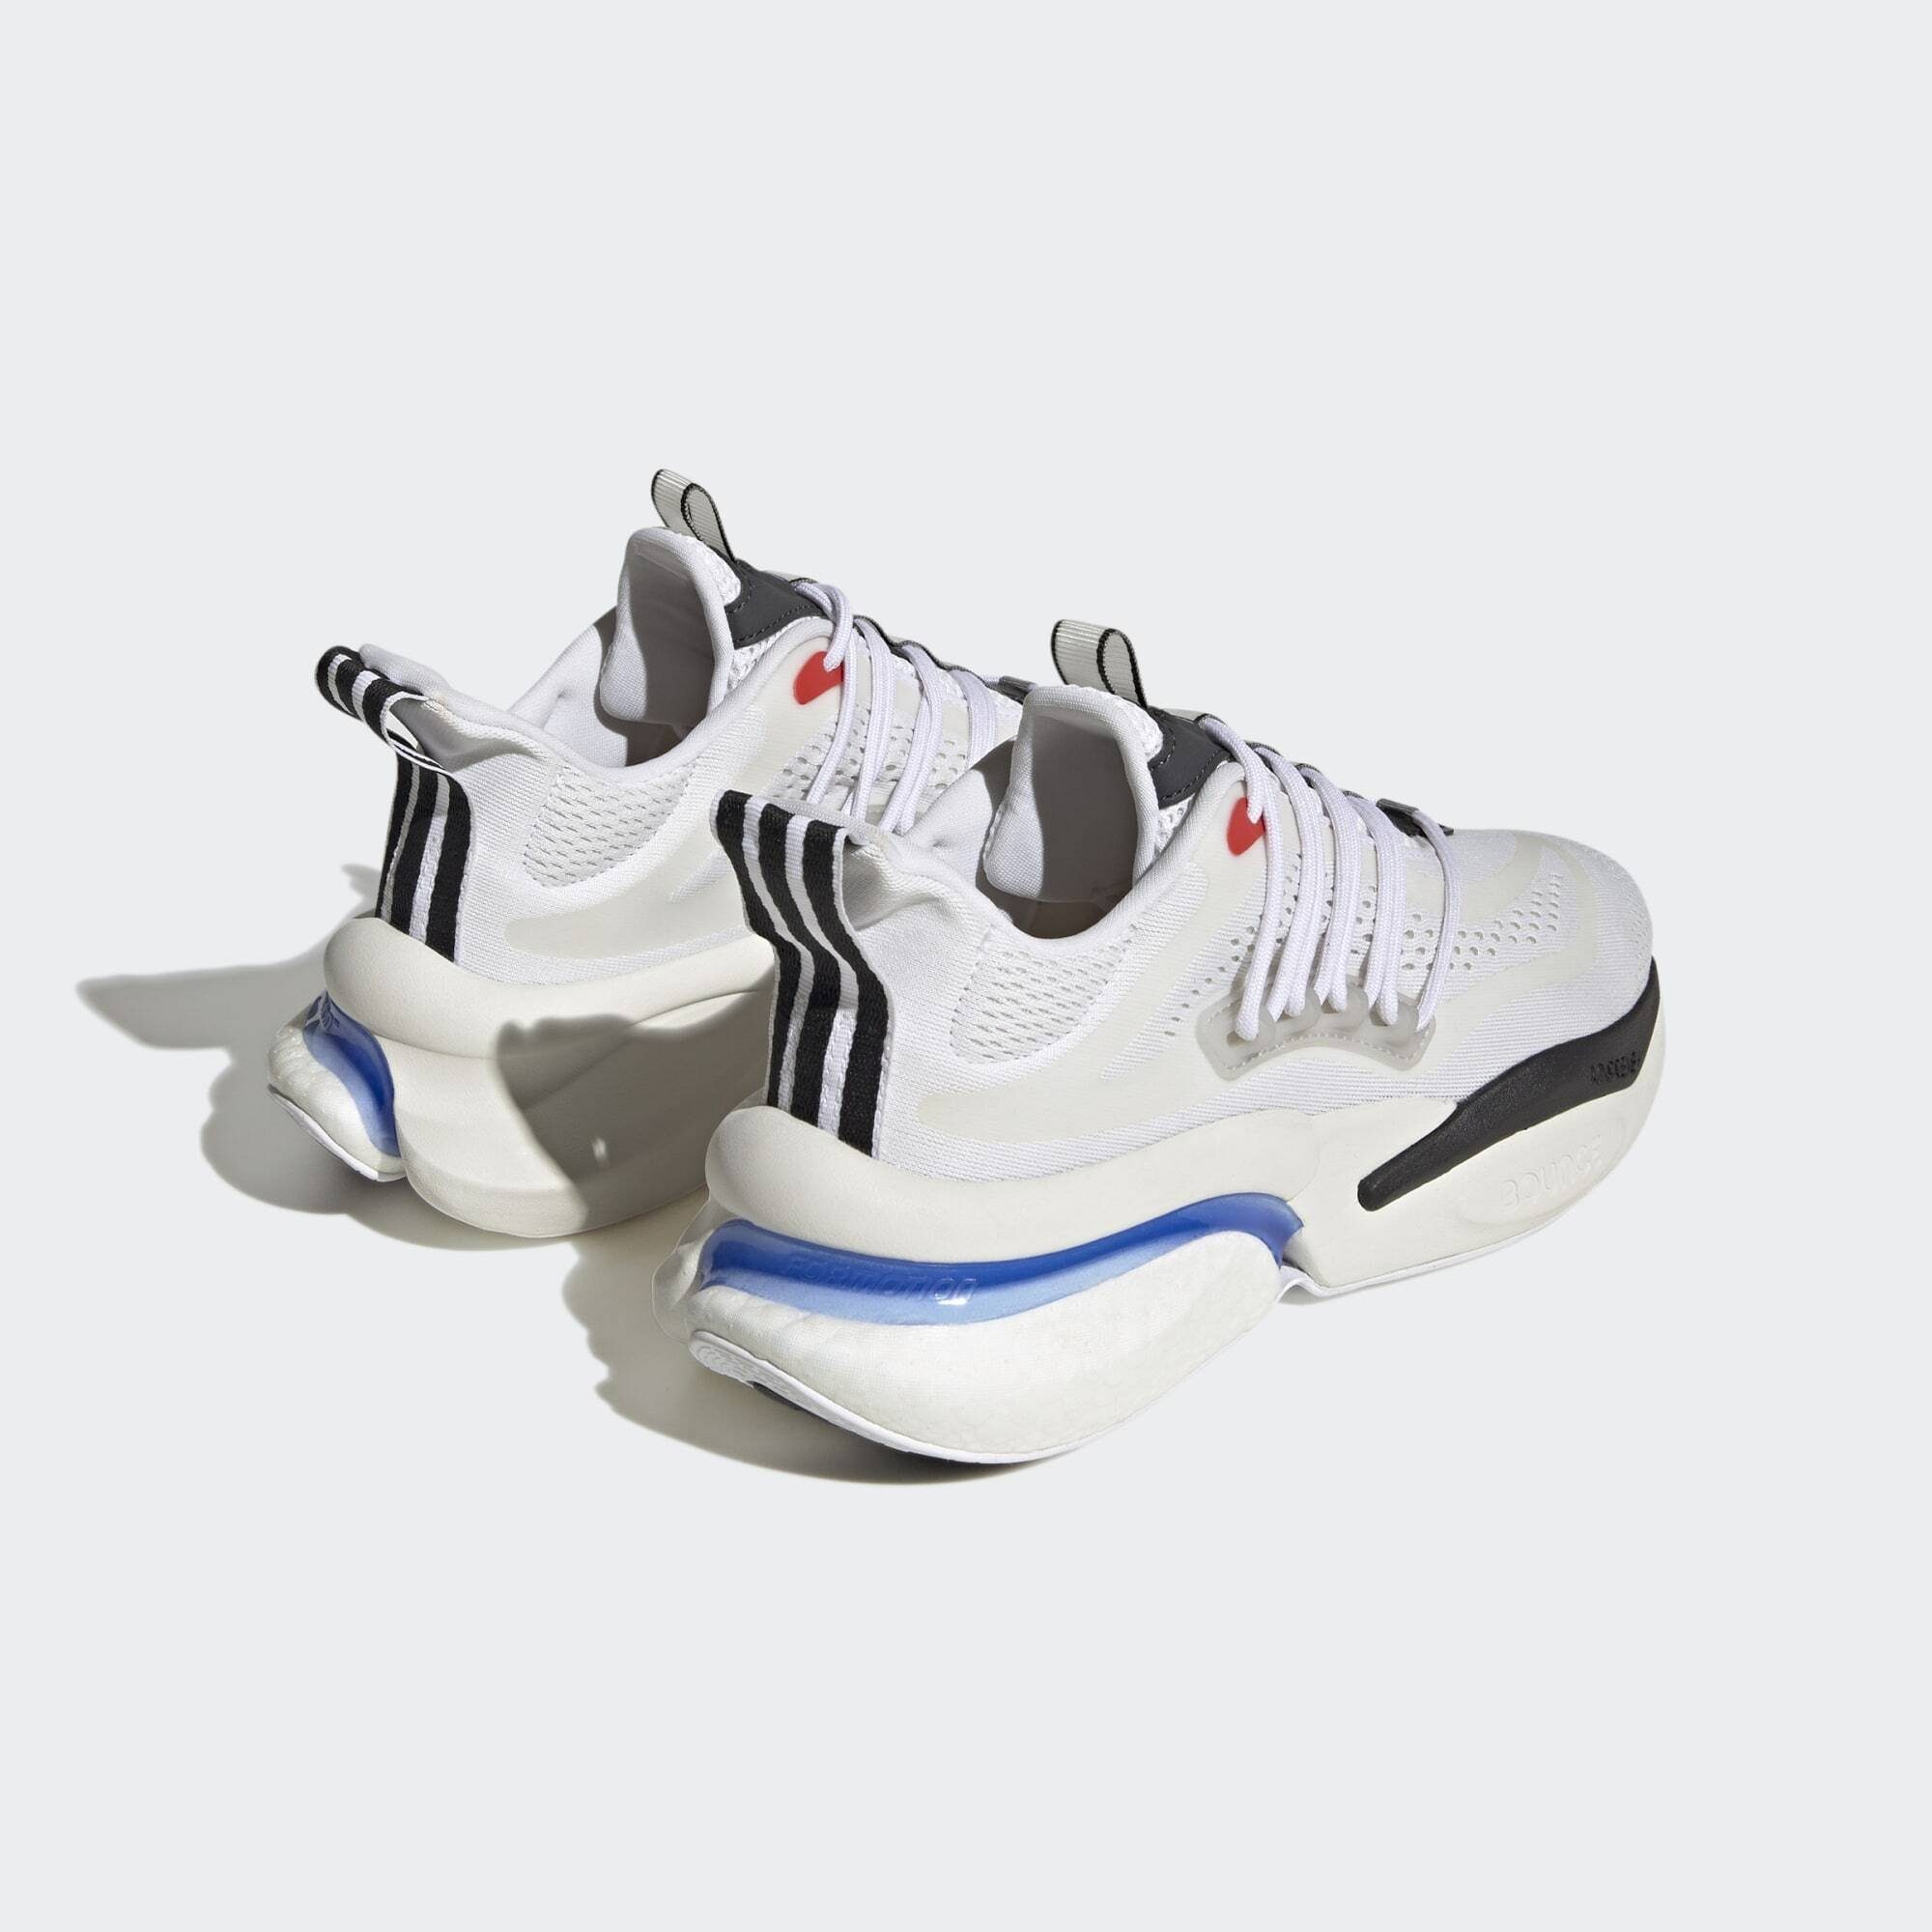 adidas Sportswear ALPHABOOST Blue V1 White Bright / SCHUH Cloud Fusion Sneaker Red 